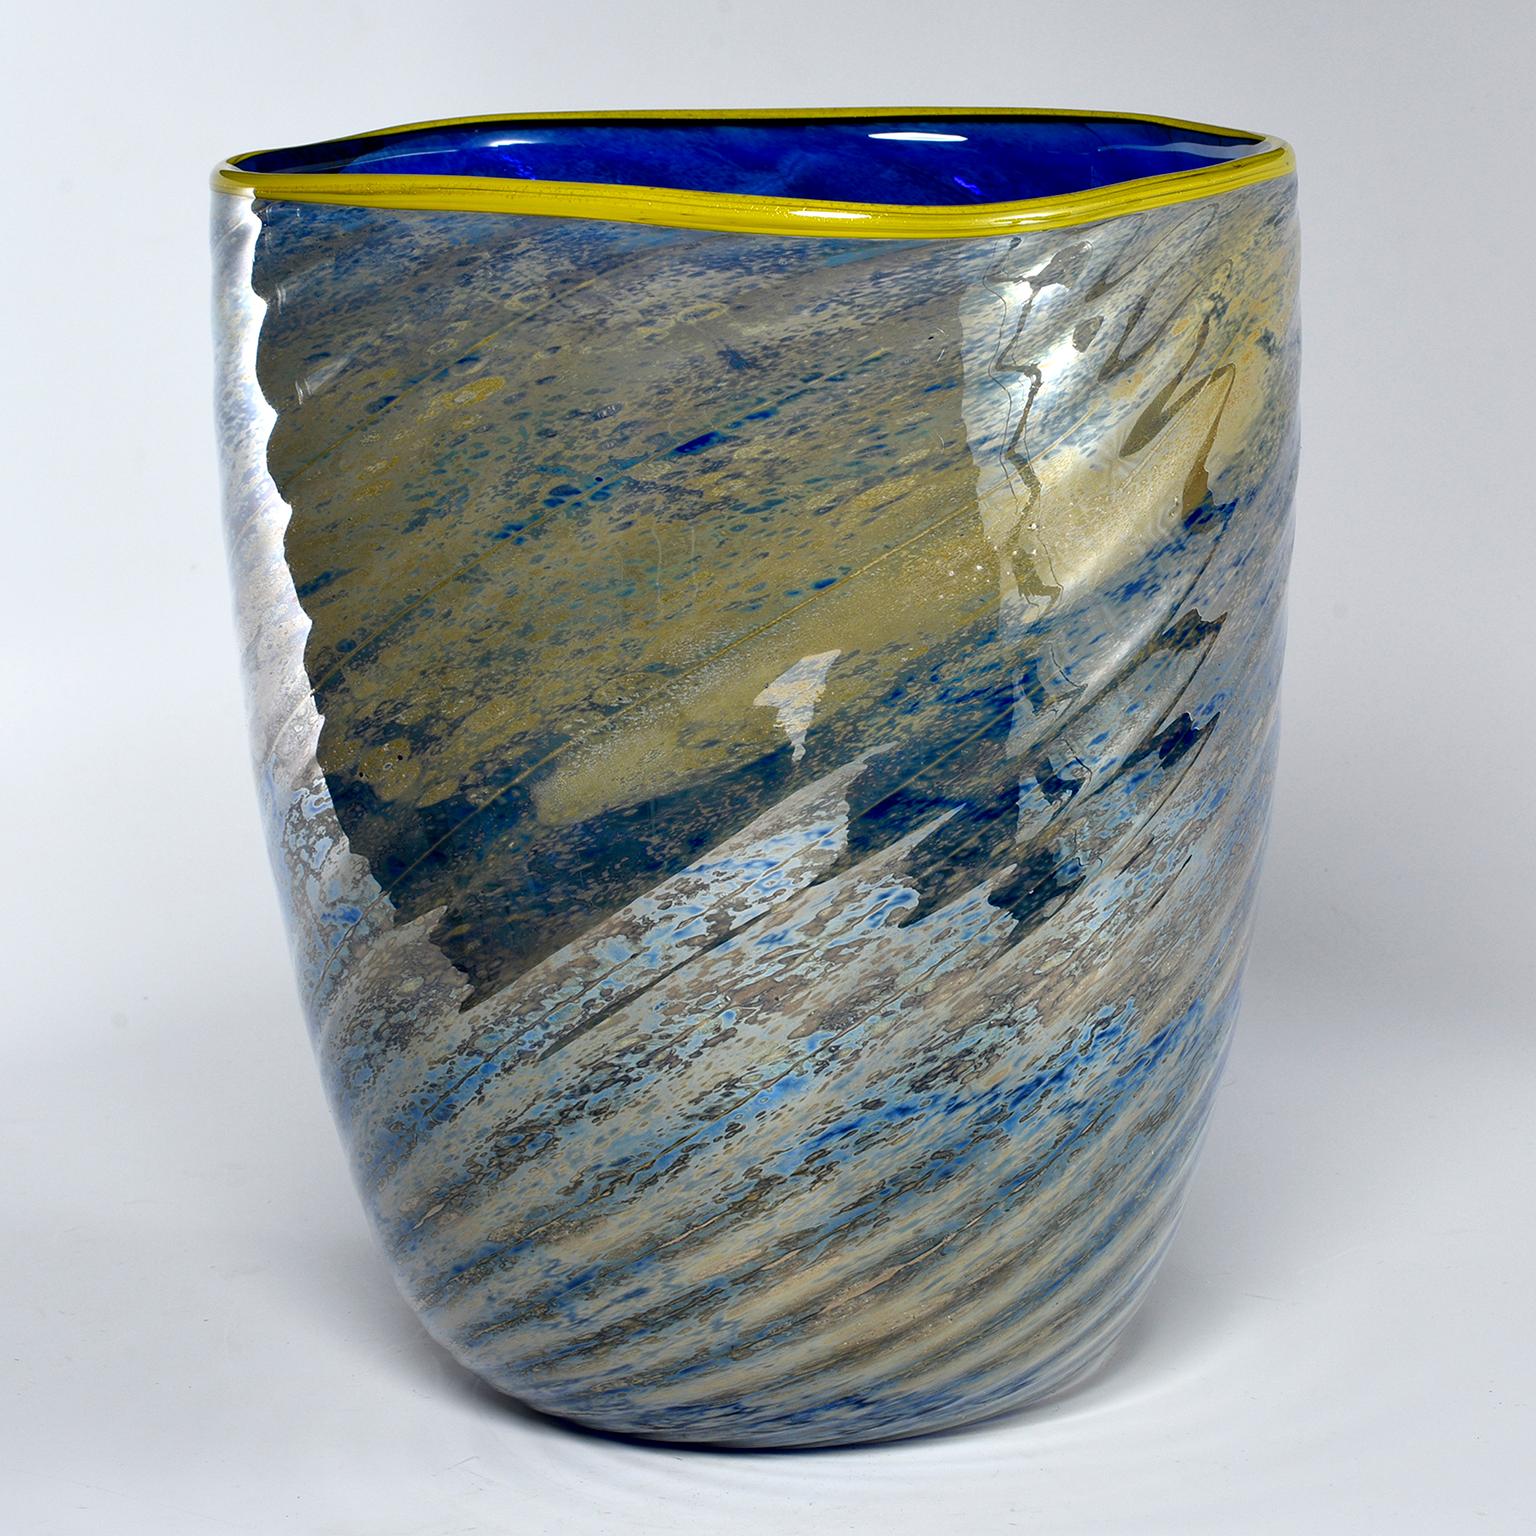 Large art glass vase has a saturated cobalt interior with yellow lip and striated blue and gold outer surface. Dates from the 1990s. Unknown maker. Found in Italy.